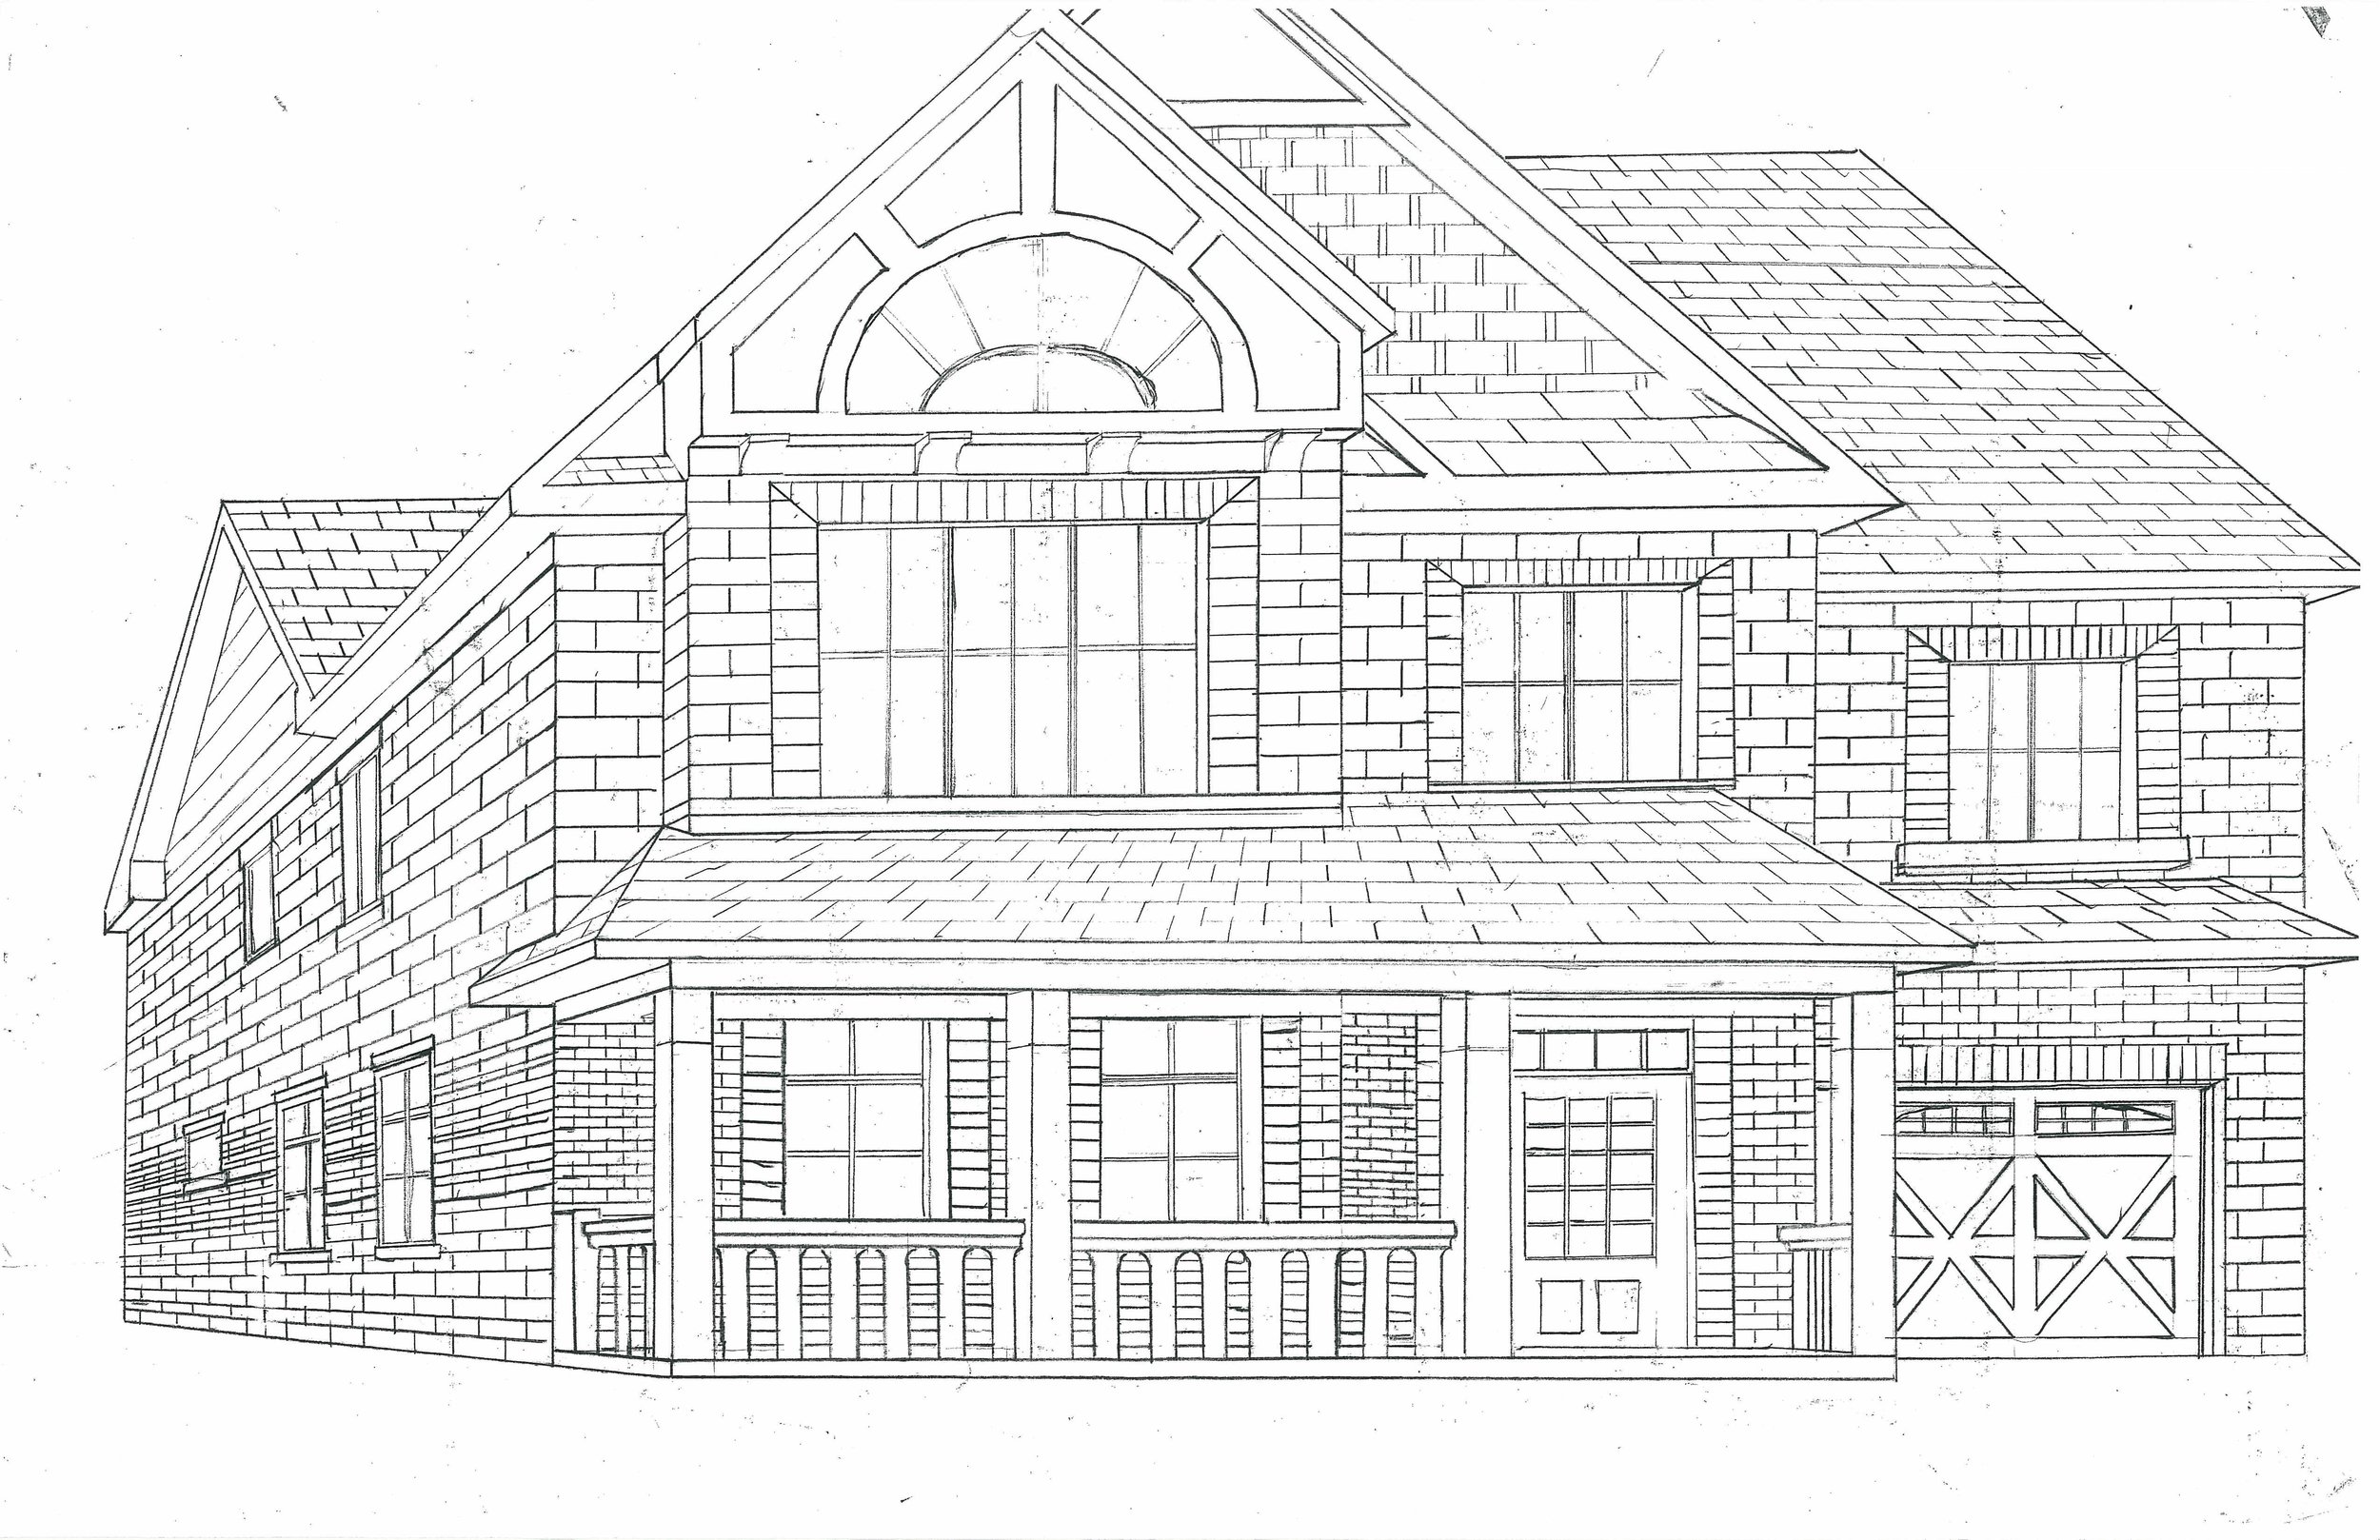 1 Point Perspective Drawing of Residential Home (Copy)